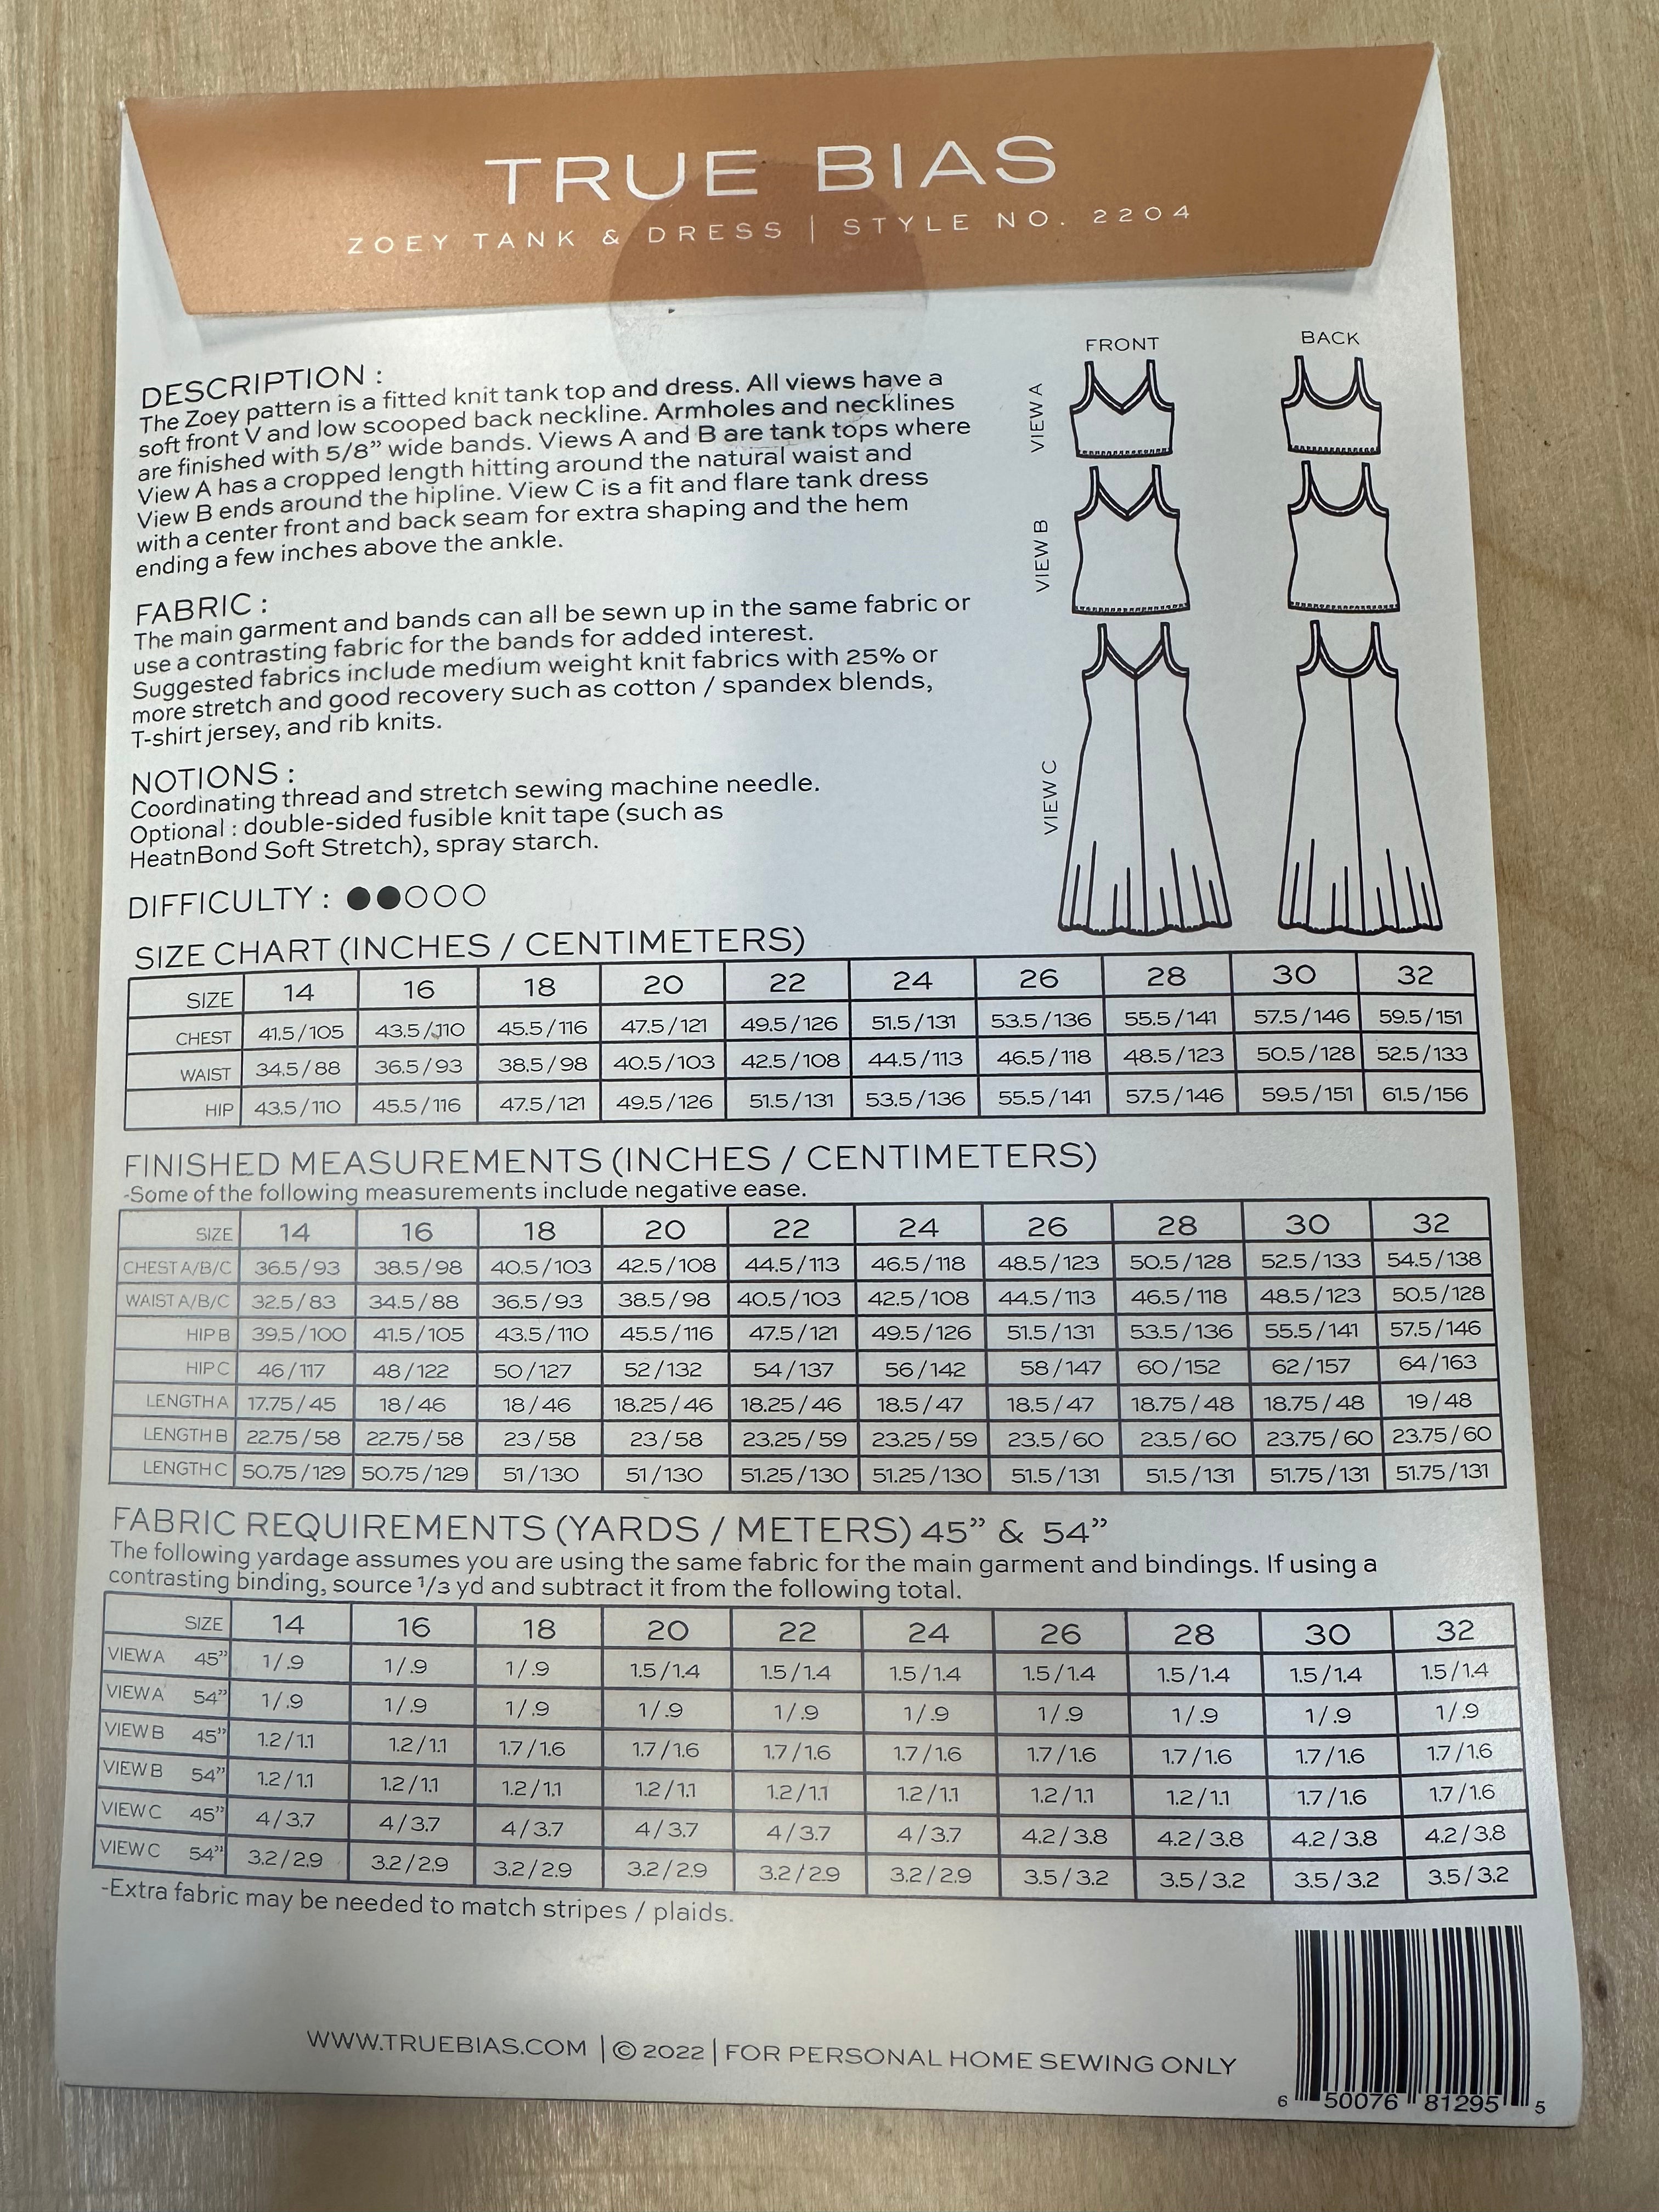 True Bias Zoey Tank and Dress Sewing Pattern Sizes 14-32